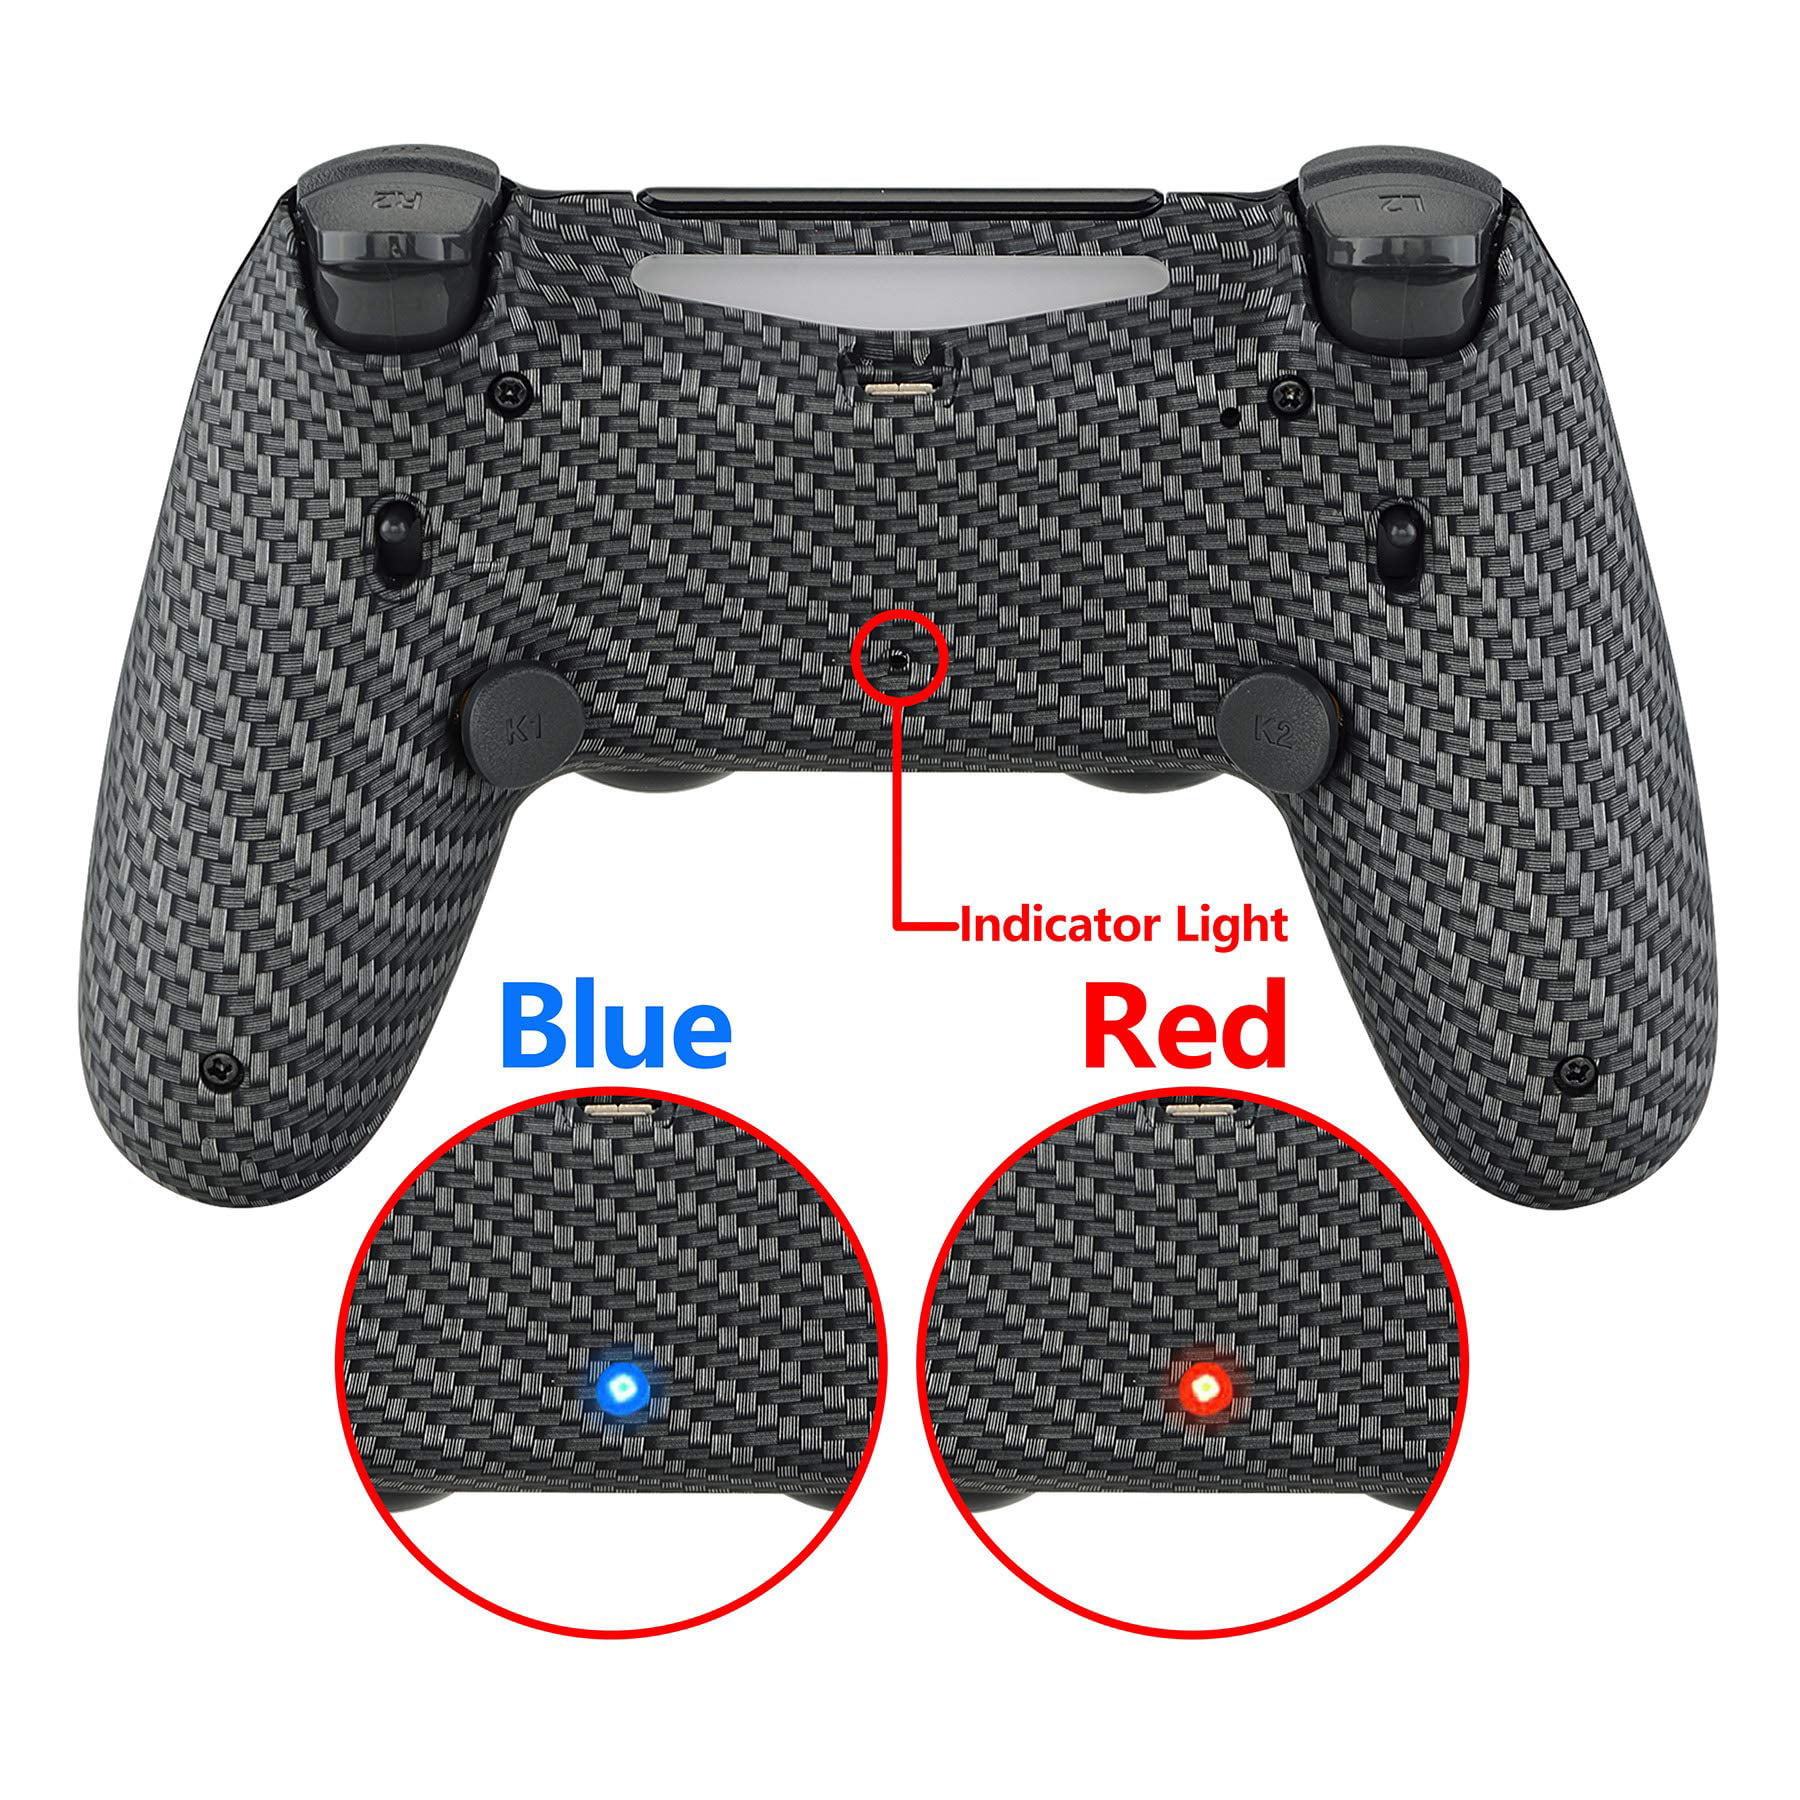 Back Upgrade PS4 FlashShot ps4 for CUH-ZCT2 Back & 2.0 Kit Fiber JDM Board Dawn Shell Controller for Buttons Trigger Lock Carbon Trigger Stop Remap eXtremeRate Redesigned 040/050/055 & & Controller,